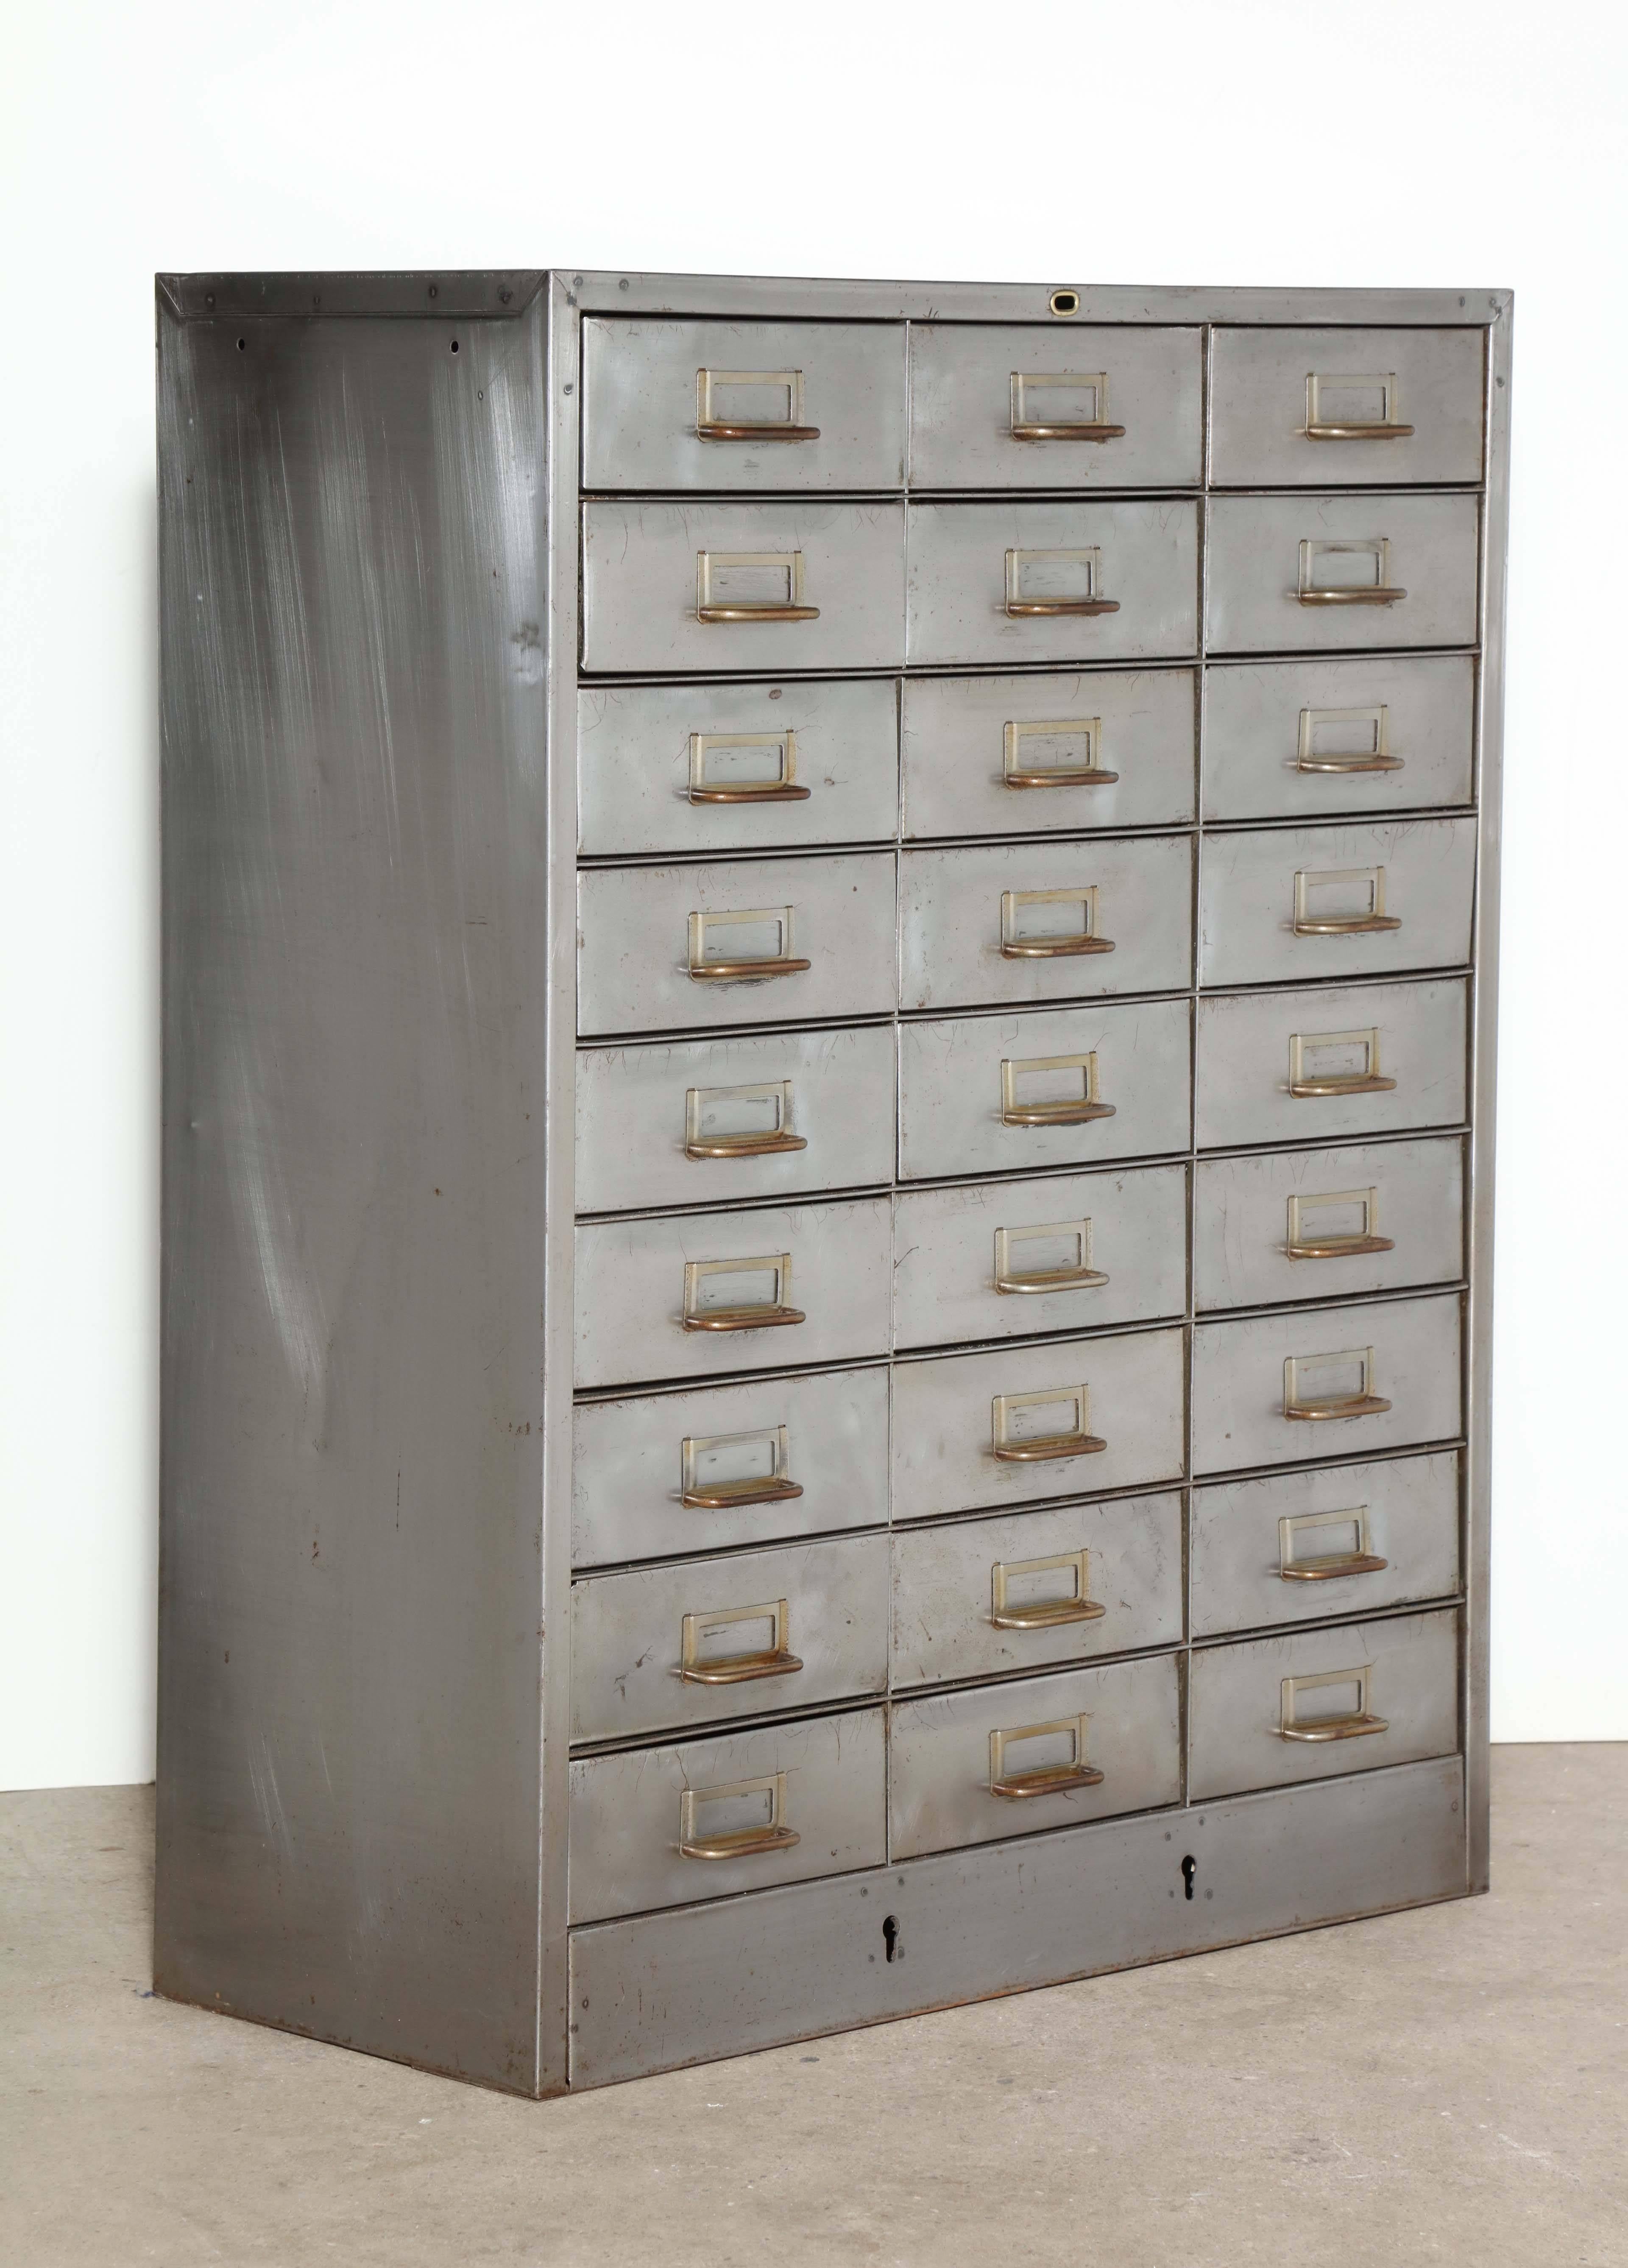 27 drawer, Apothecary style, steel and brass storage cabinet, circa 1940s,
with brass name plates and drawer pulls. Great storage for smaller parts. 
Three rows of nine drawers each. Drawer dimensions: 9